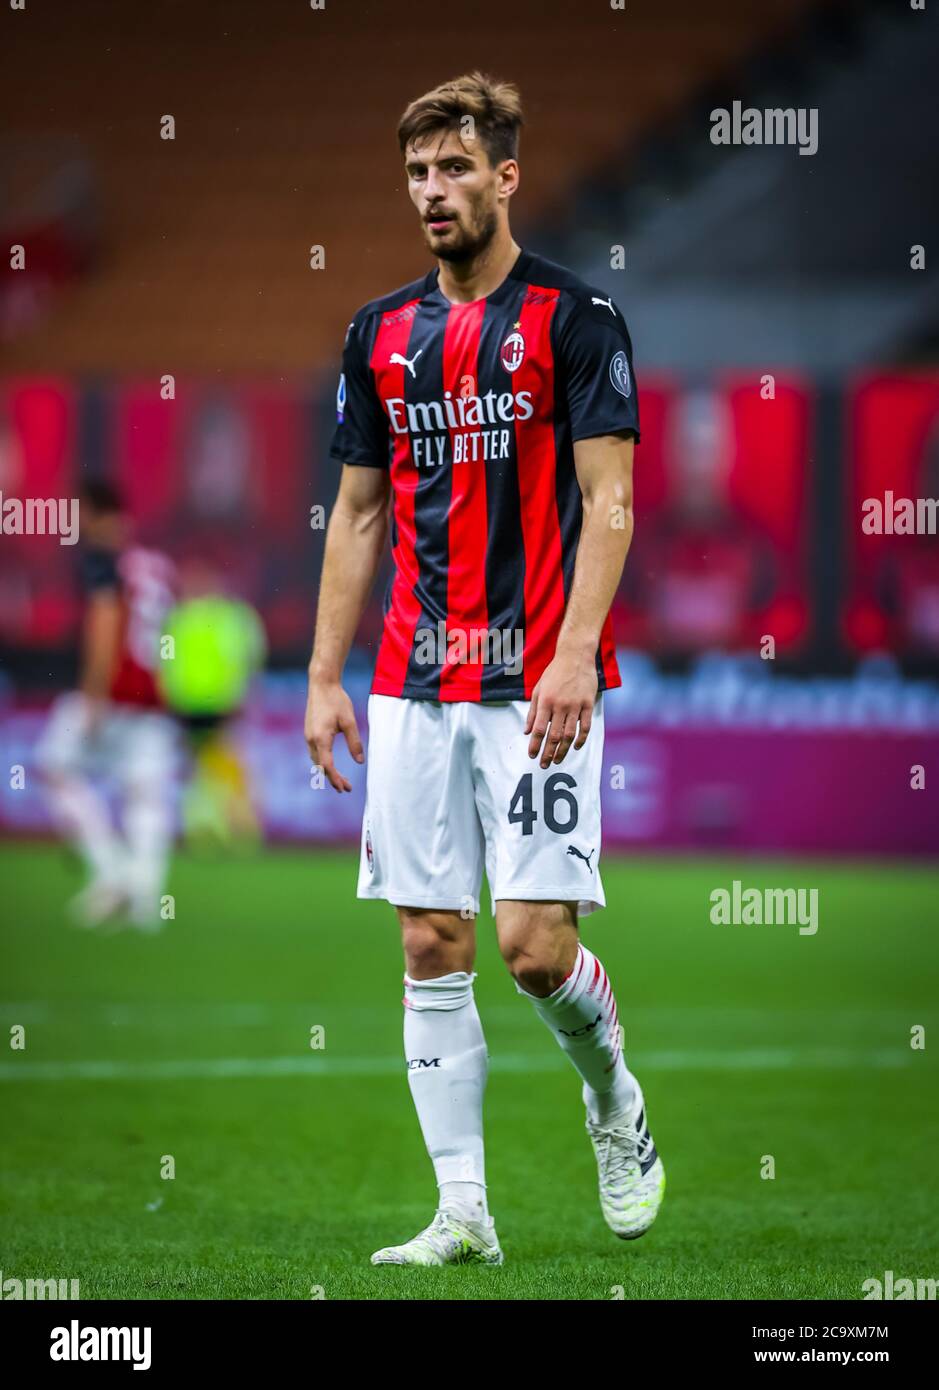 Milan, Italy. 1st Aug, 2020. Matteo Gabbia of AC Milan during the Serie A 2019/20 match between AC Milan vs Cagliari Calcio at the San Siro Stadium, Milan, Italy on August 01, 2020 - Photo Fabrizio Carabelli/LM Credit: Fabrizio Carabelli/LPS/ZUMA Wire/Alamy Live News Stock Photo